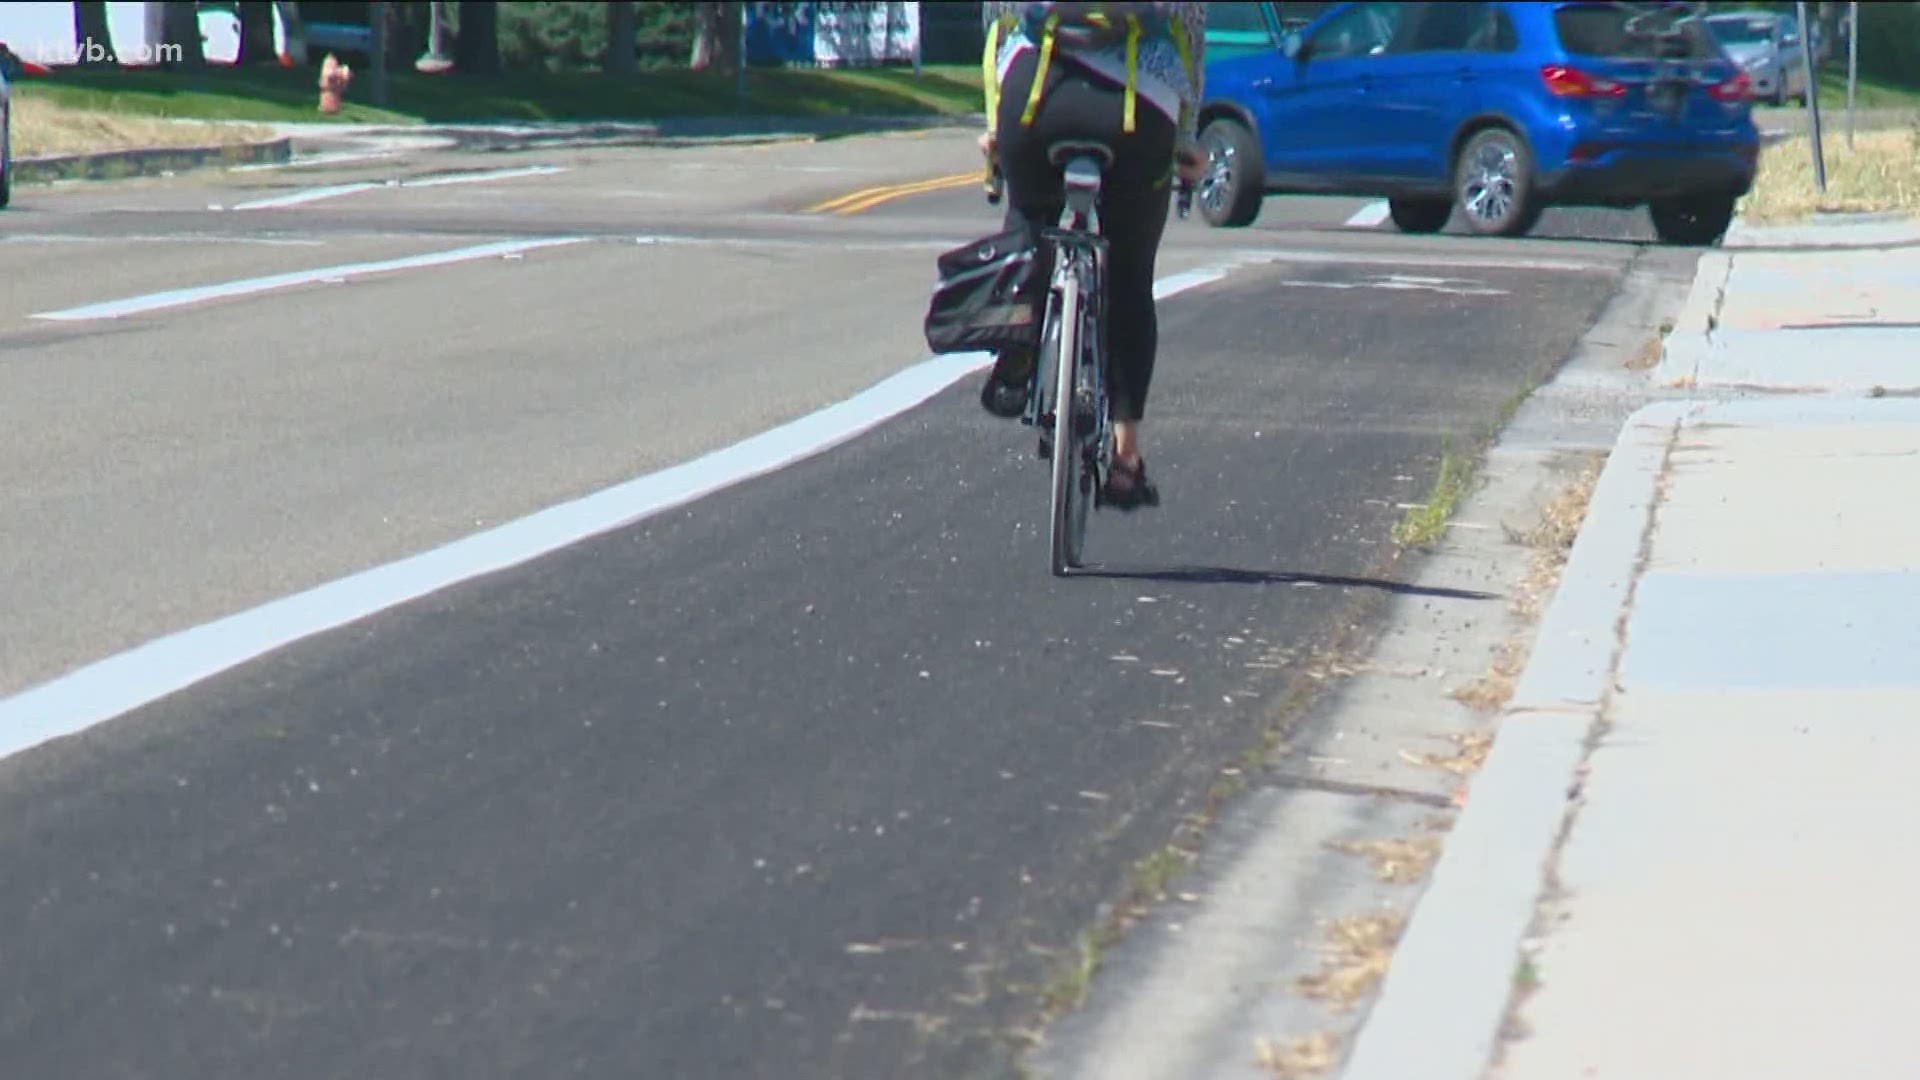 The Ada County Highway District is partnering with an Arizona company to improve bikes lanes in the area.